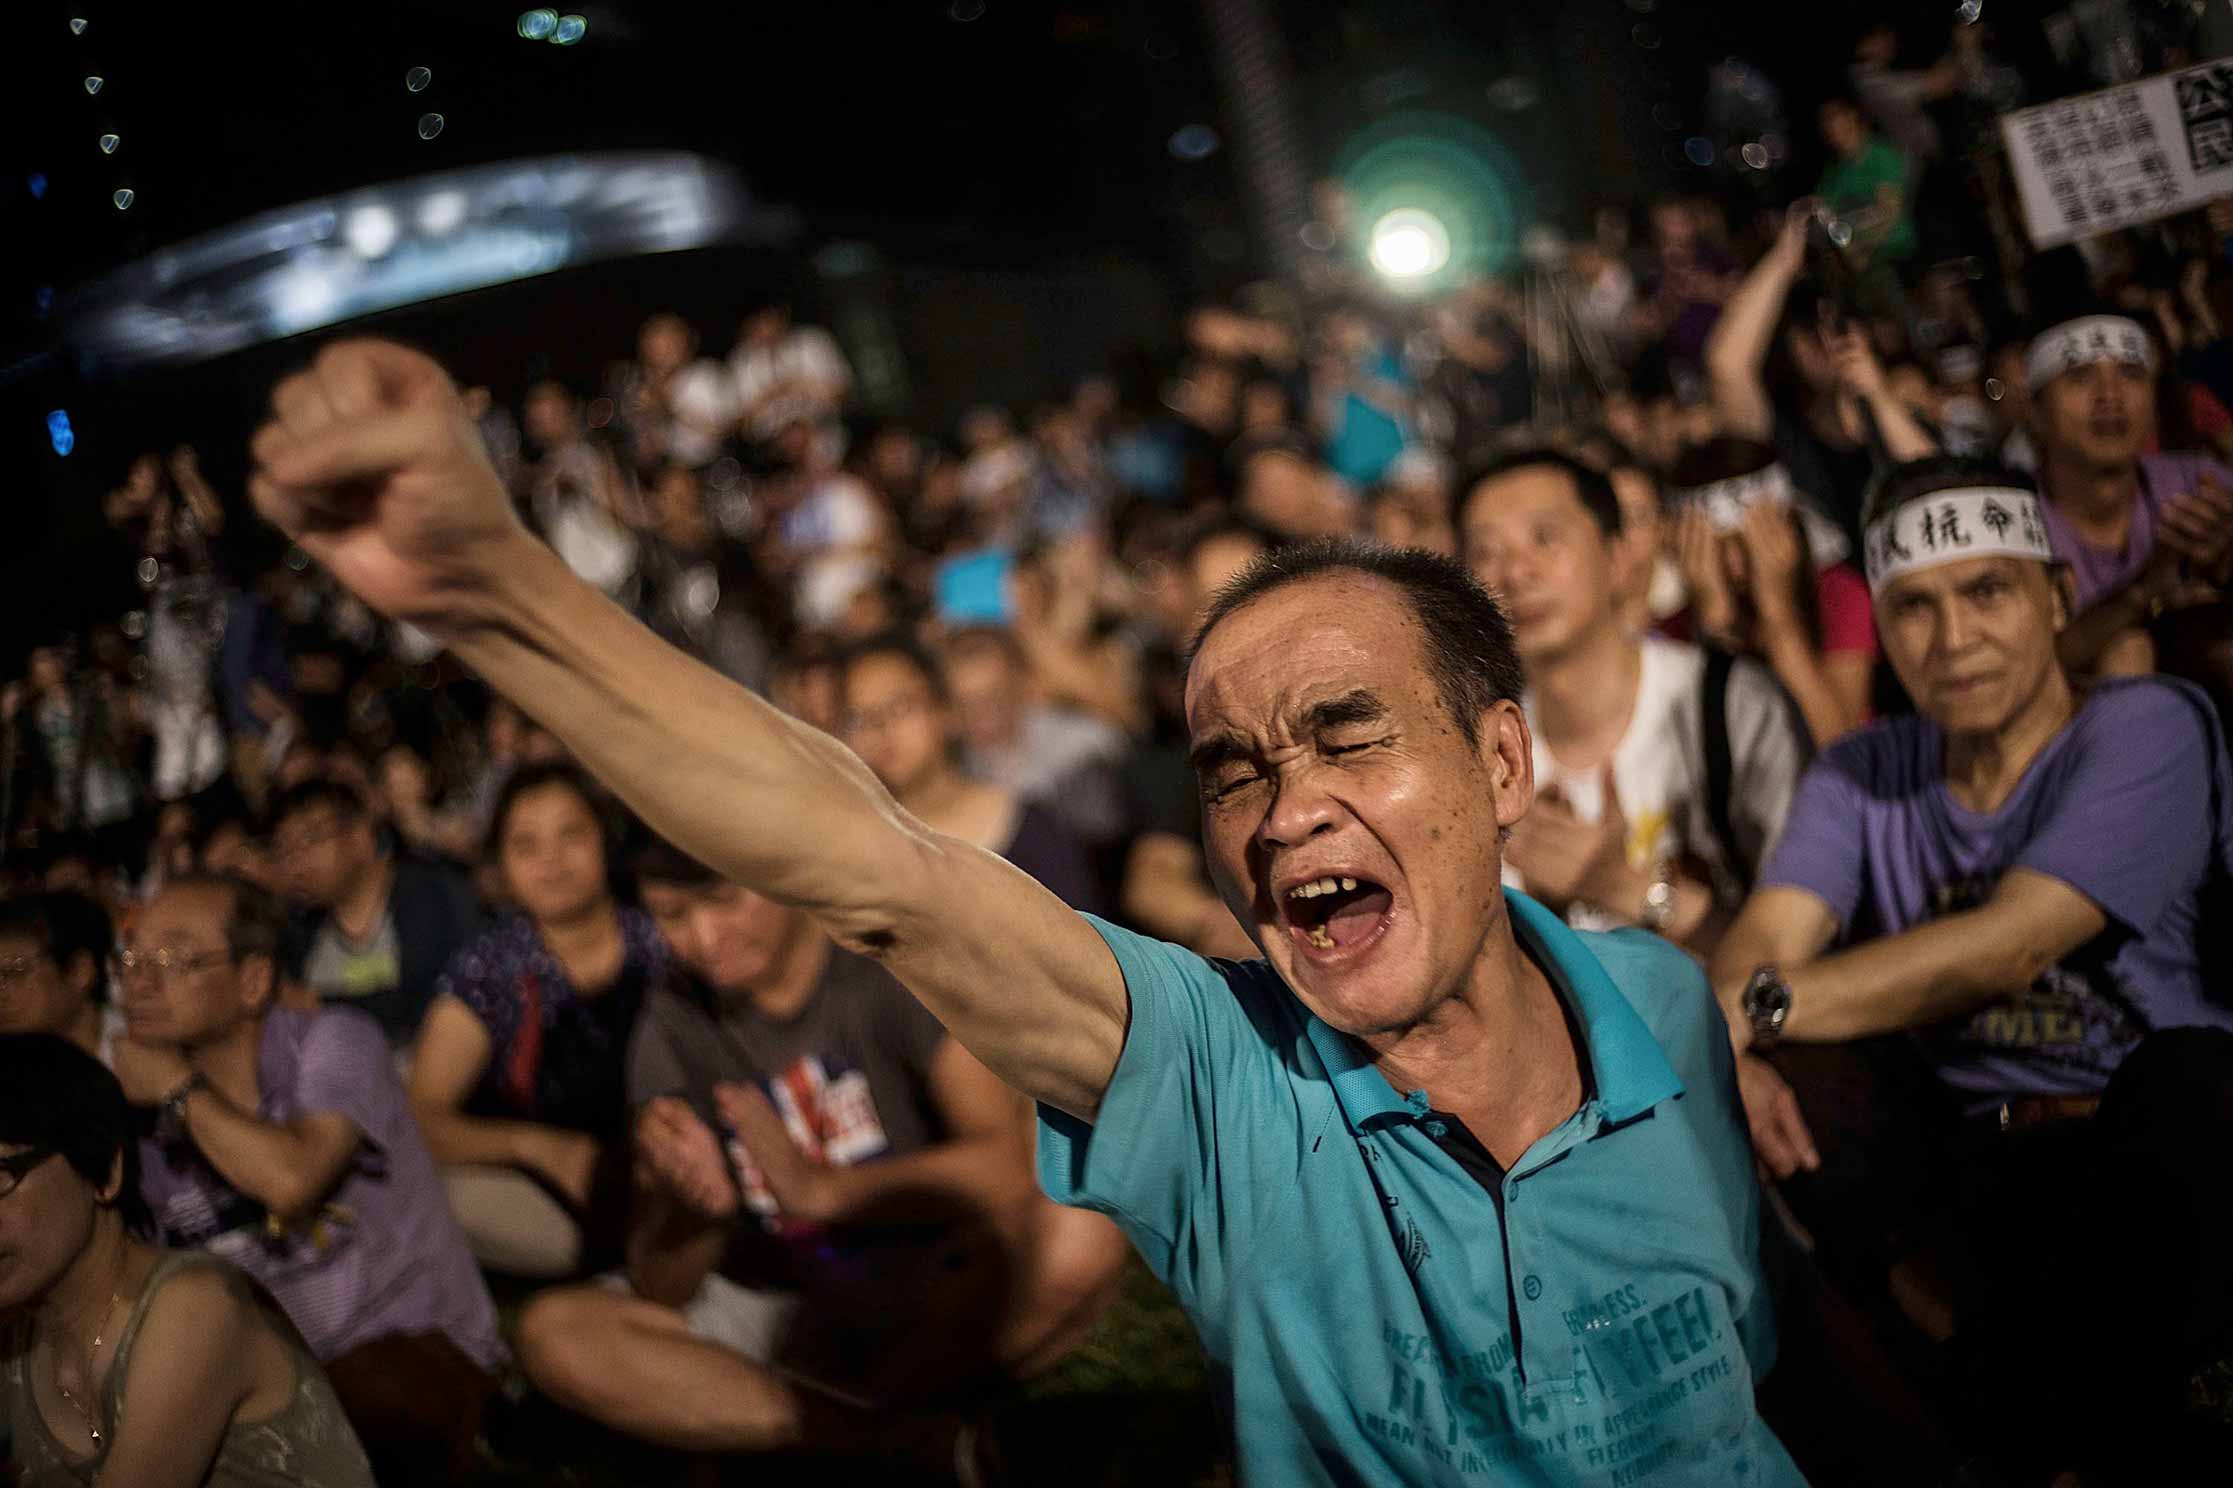 Hong Kong protesters rally outside government offices after Beijing’s Aug. 31 announcement of its election scheme for the territory